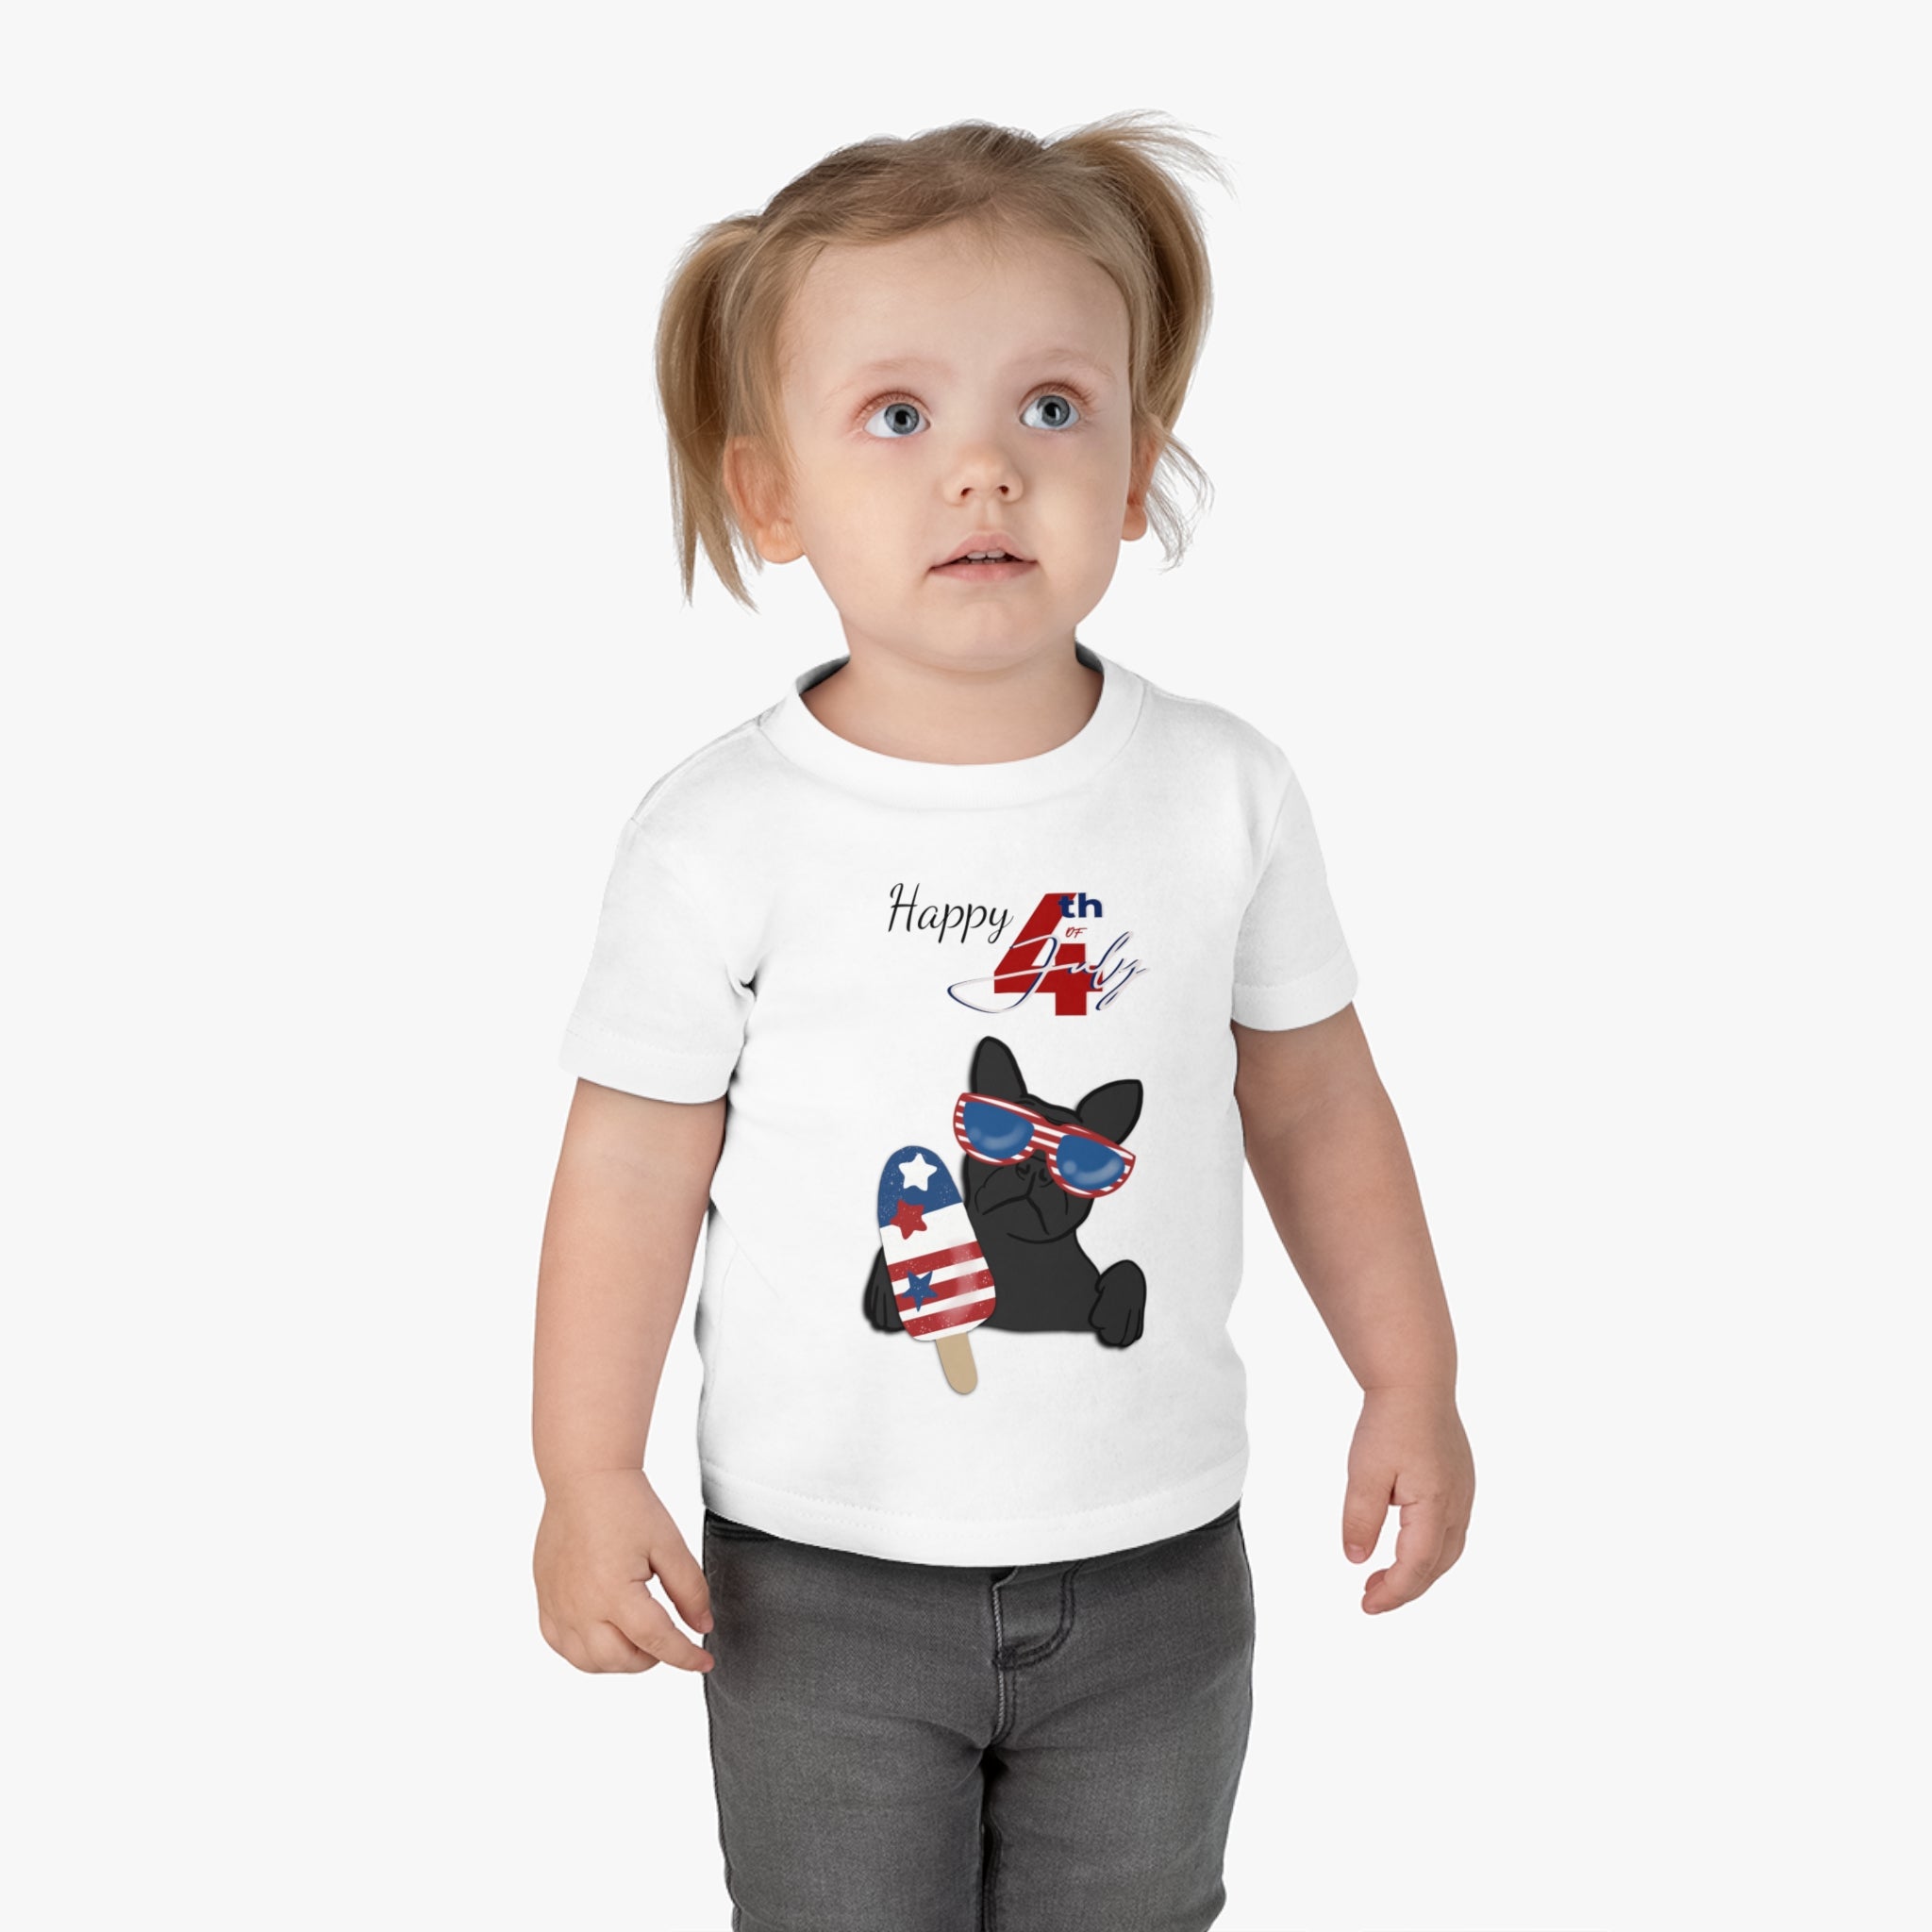 Happy 4th of July Summer Cat Infant Shirt, Baby Tee, Infant Tee